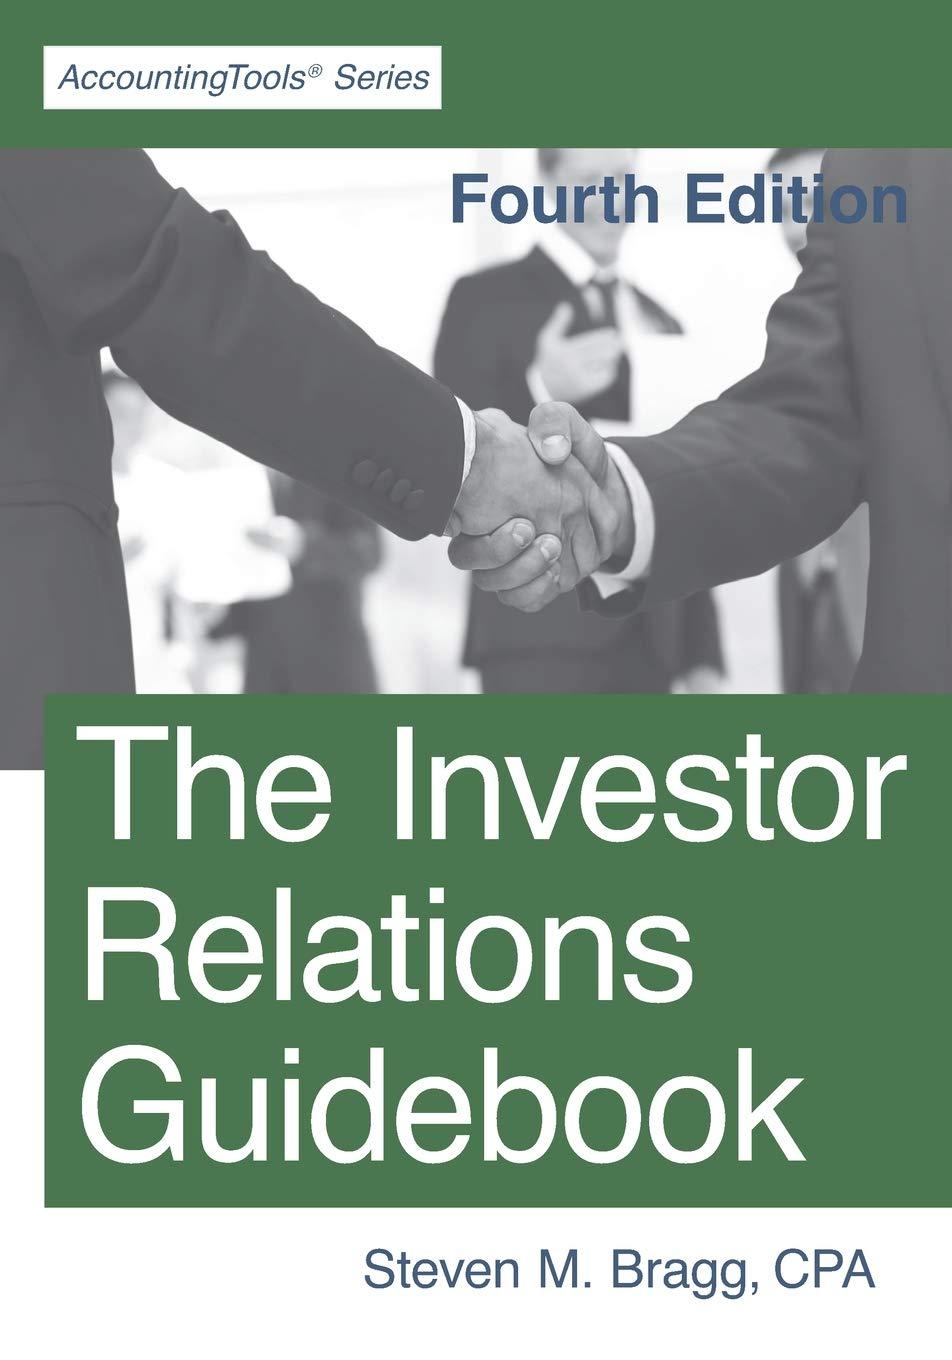 the investor relations guidebook 4th edition steven m. bragg 1642210390, 978-1642210392